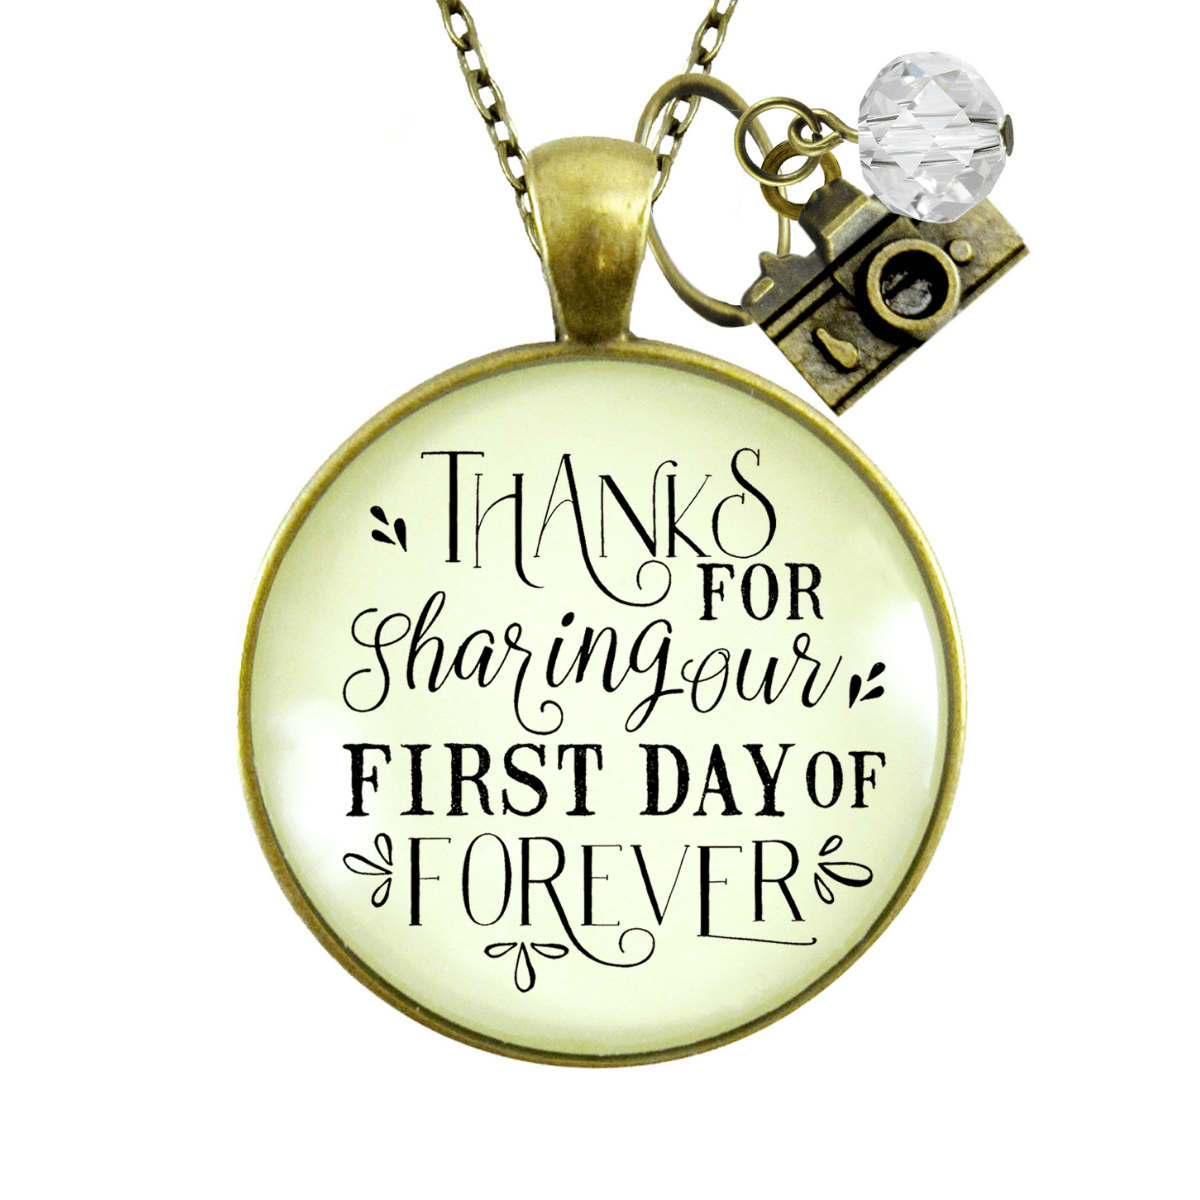 Gutsy Goodness Wedding Photographer Gift Necklace Thanks for Sharing Camera Charm - Gutsy Goodness Handmade Jewelry;Wedding Photographer Gift Necklace Thanks For Sharing Camera Charm - Gutsy Goodness Handmade Jewelry Gifts